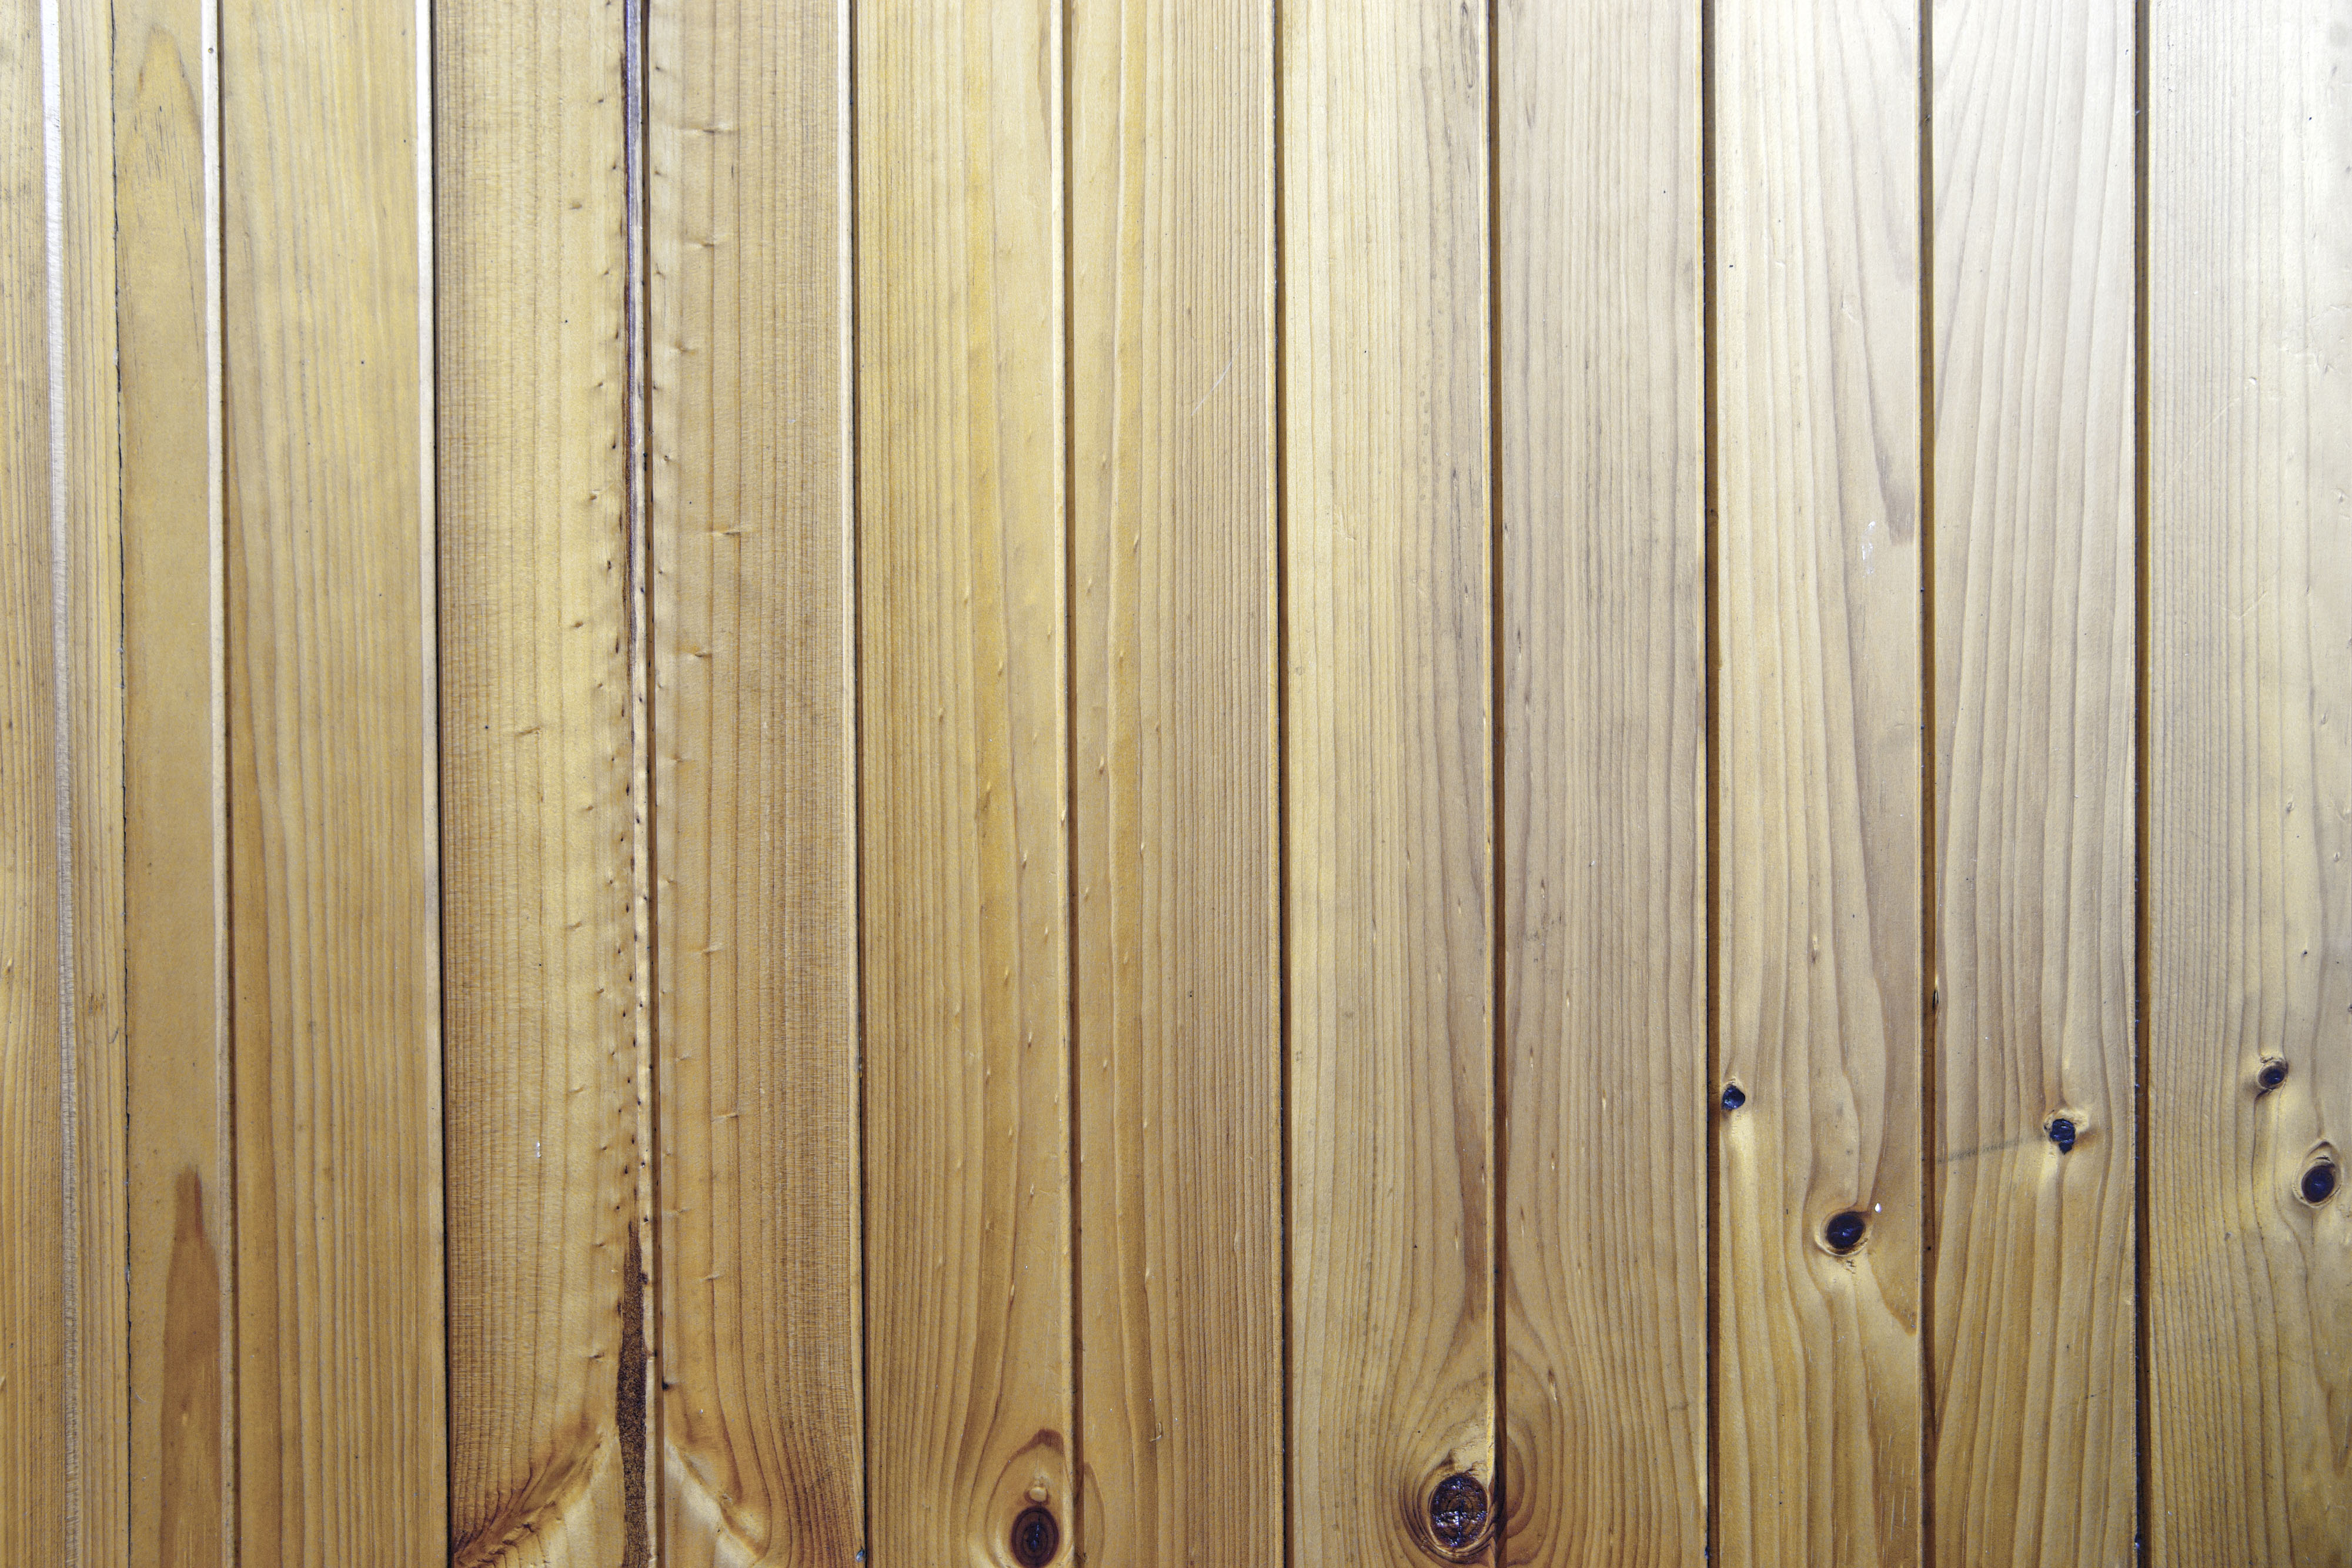 two free wood panel textures | www.myfreetextures.com ...